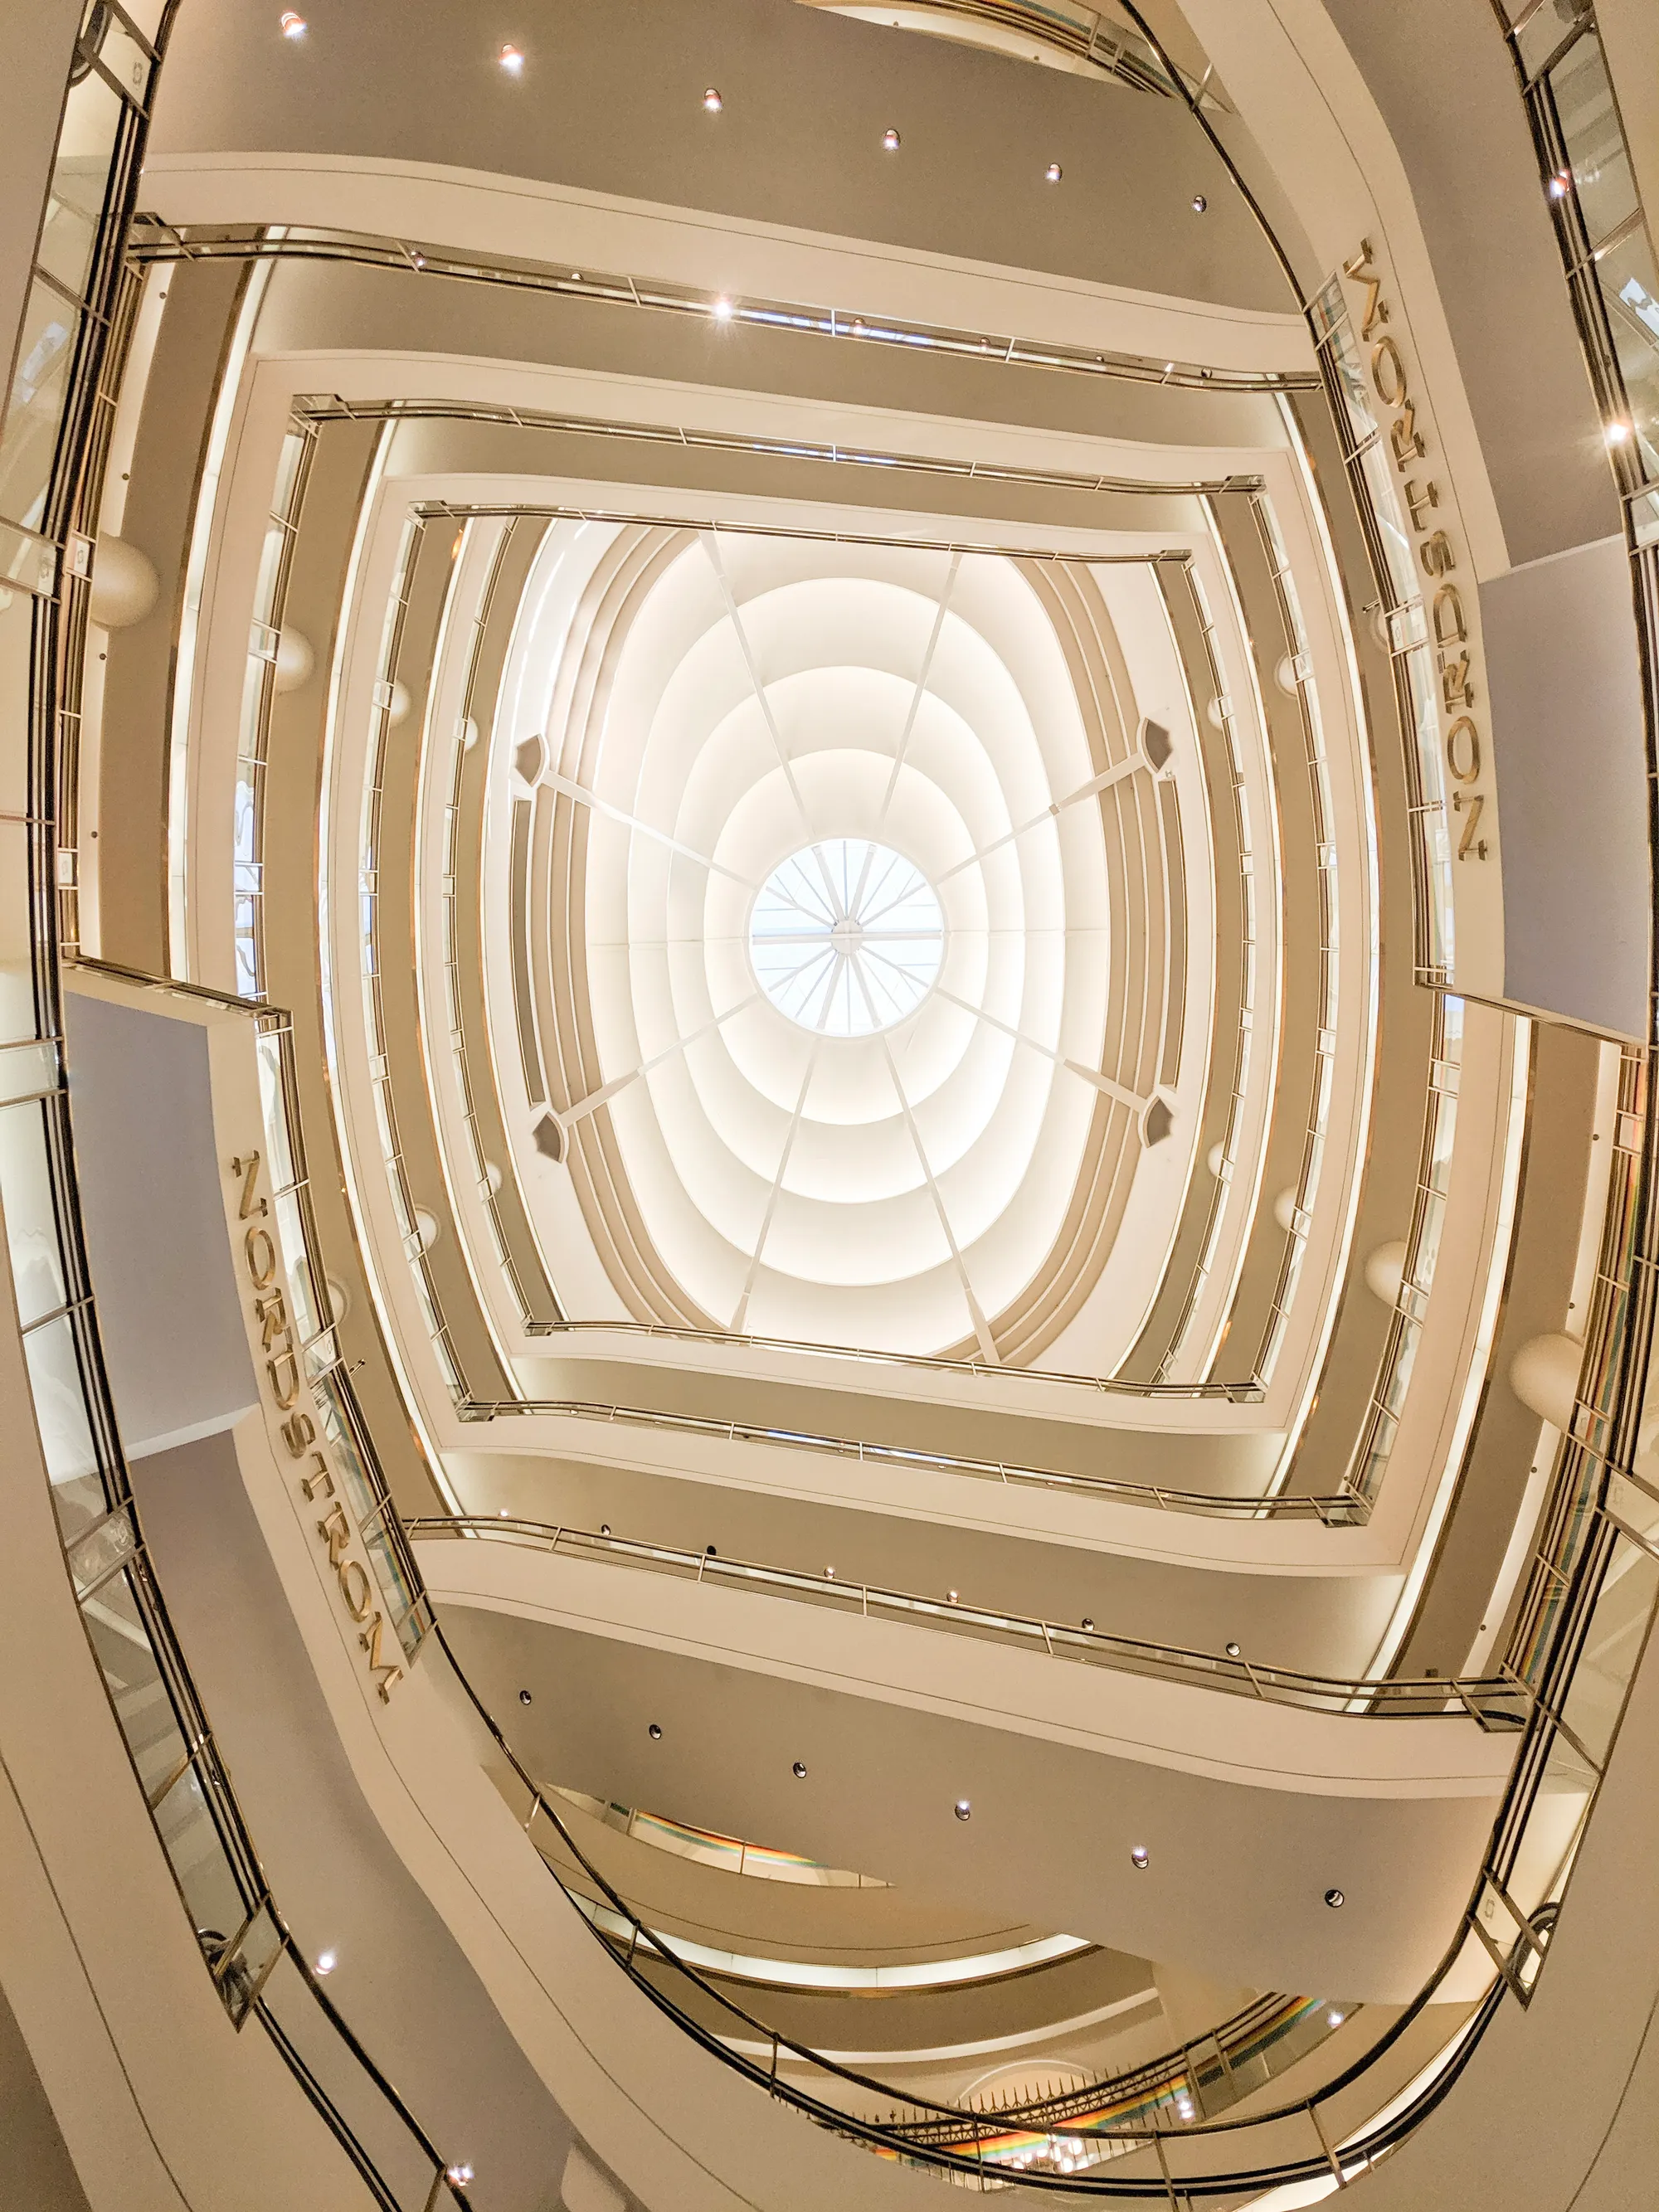 A photograph looking up at a domed ceiling through multiple stories of spiral walkways.